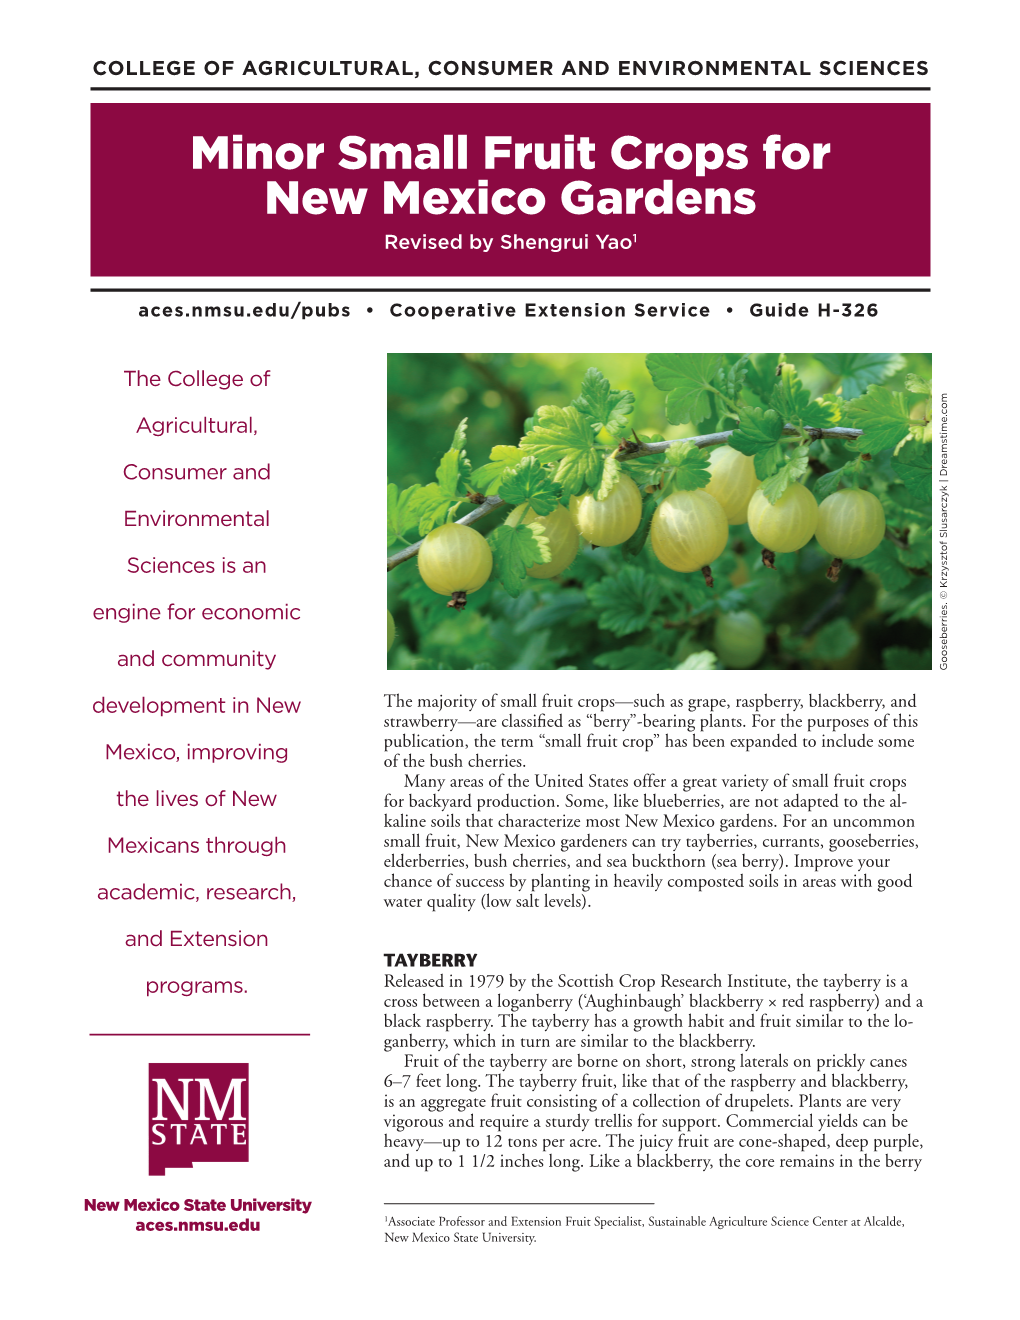 Minor Small Fruit Crops for New Mexico Gardens